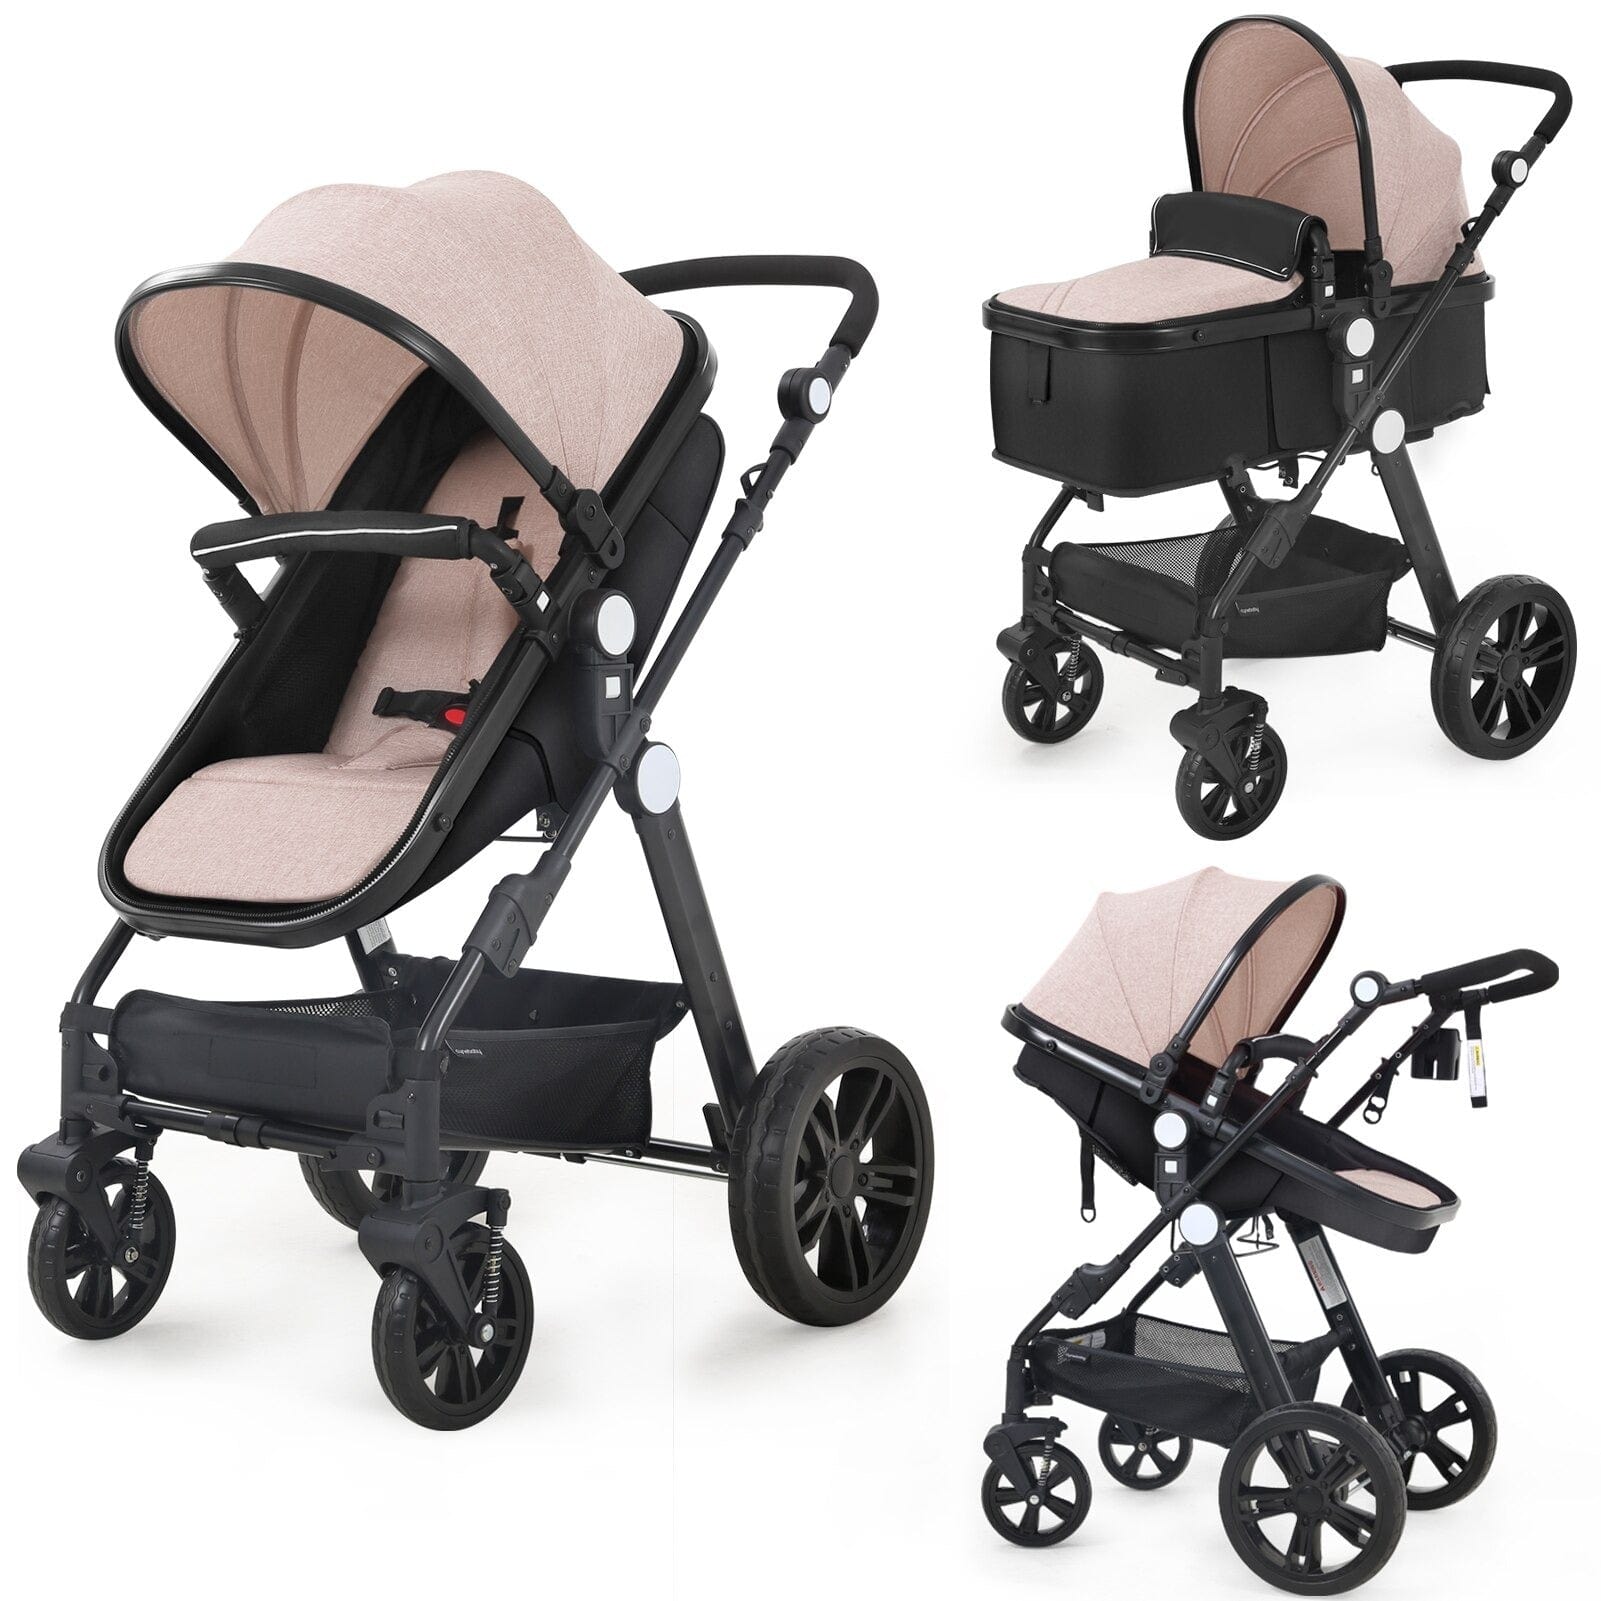 Muum baby stroller, Models and Prices